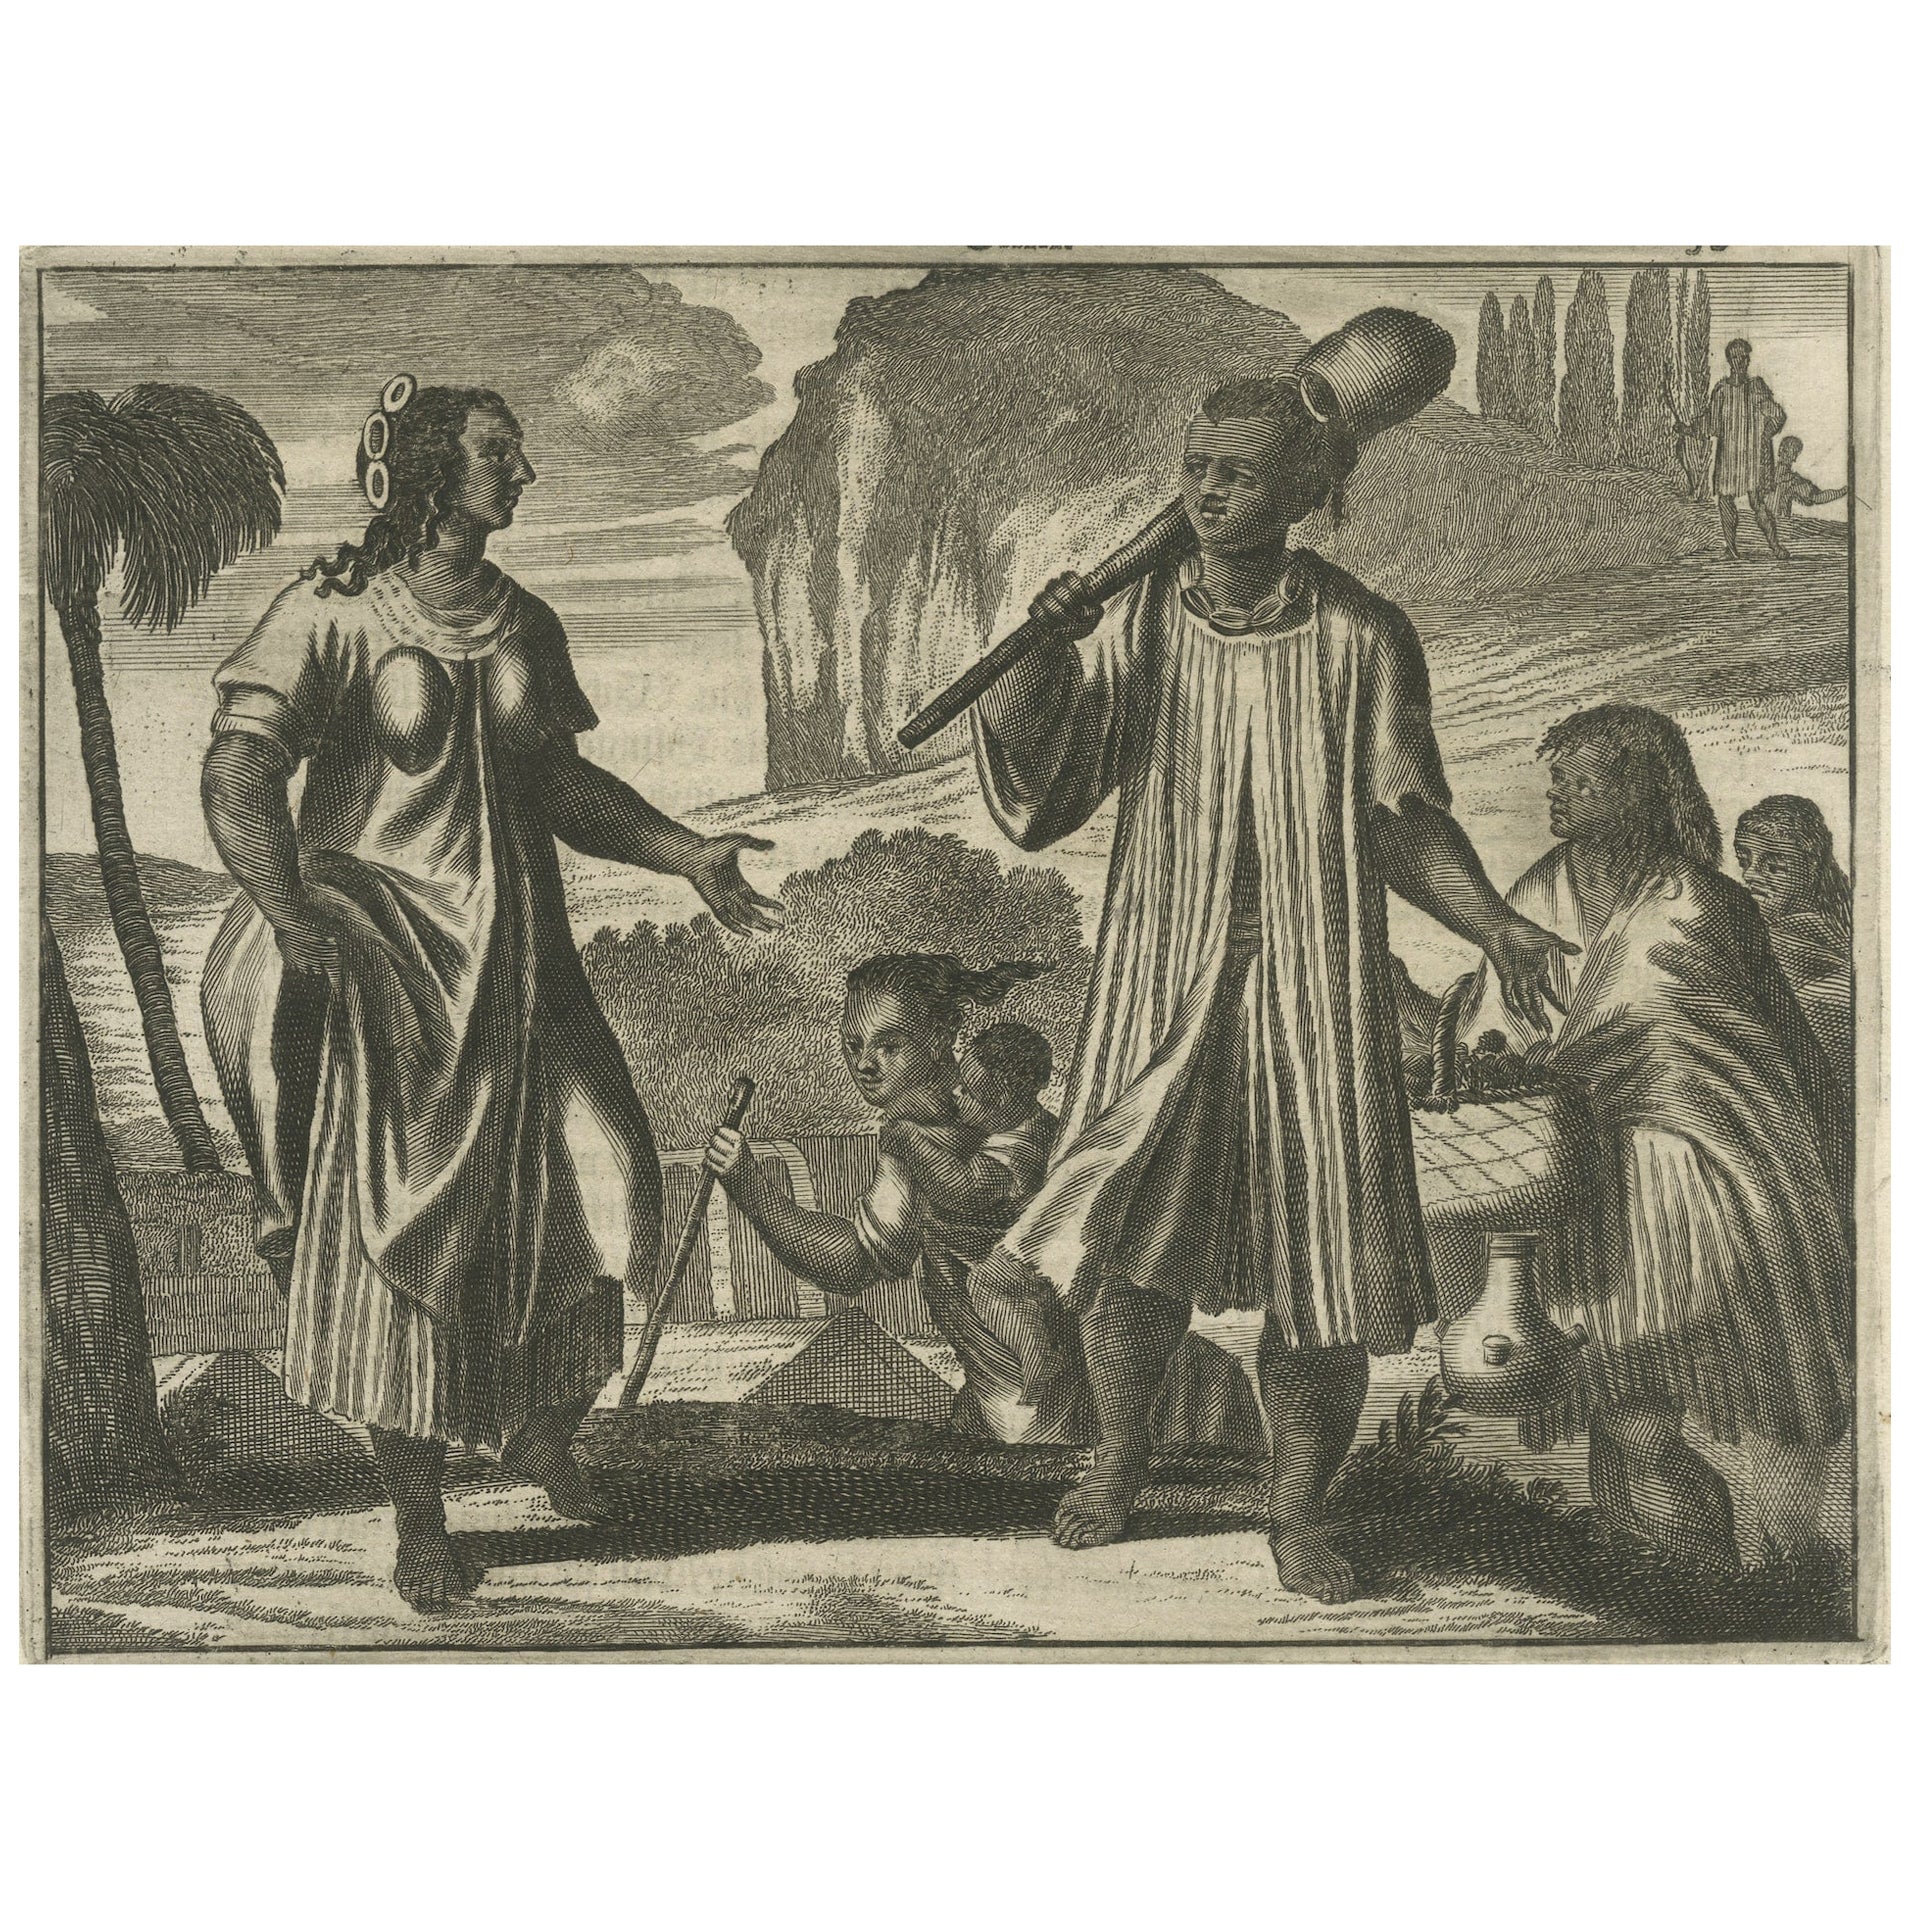 Scenes from 17th Century Chile: A Glimpse of Early Indigenous Cultures, 1673 For Sale